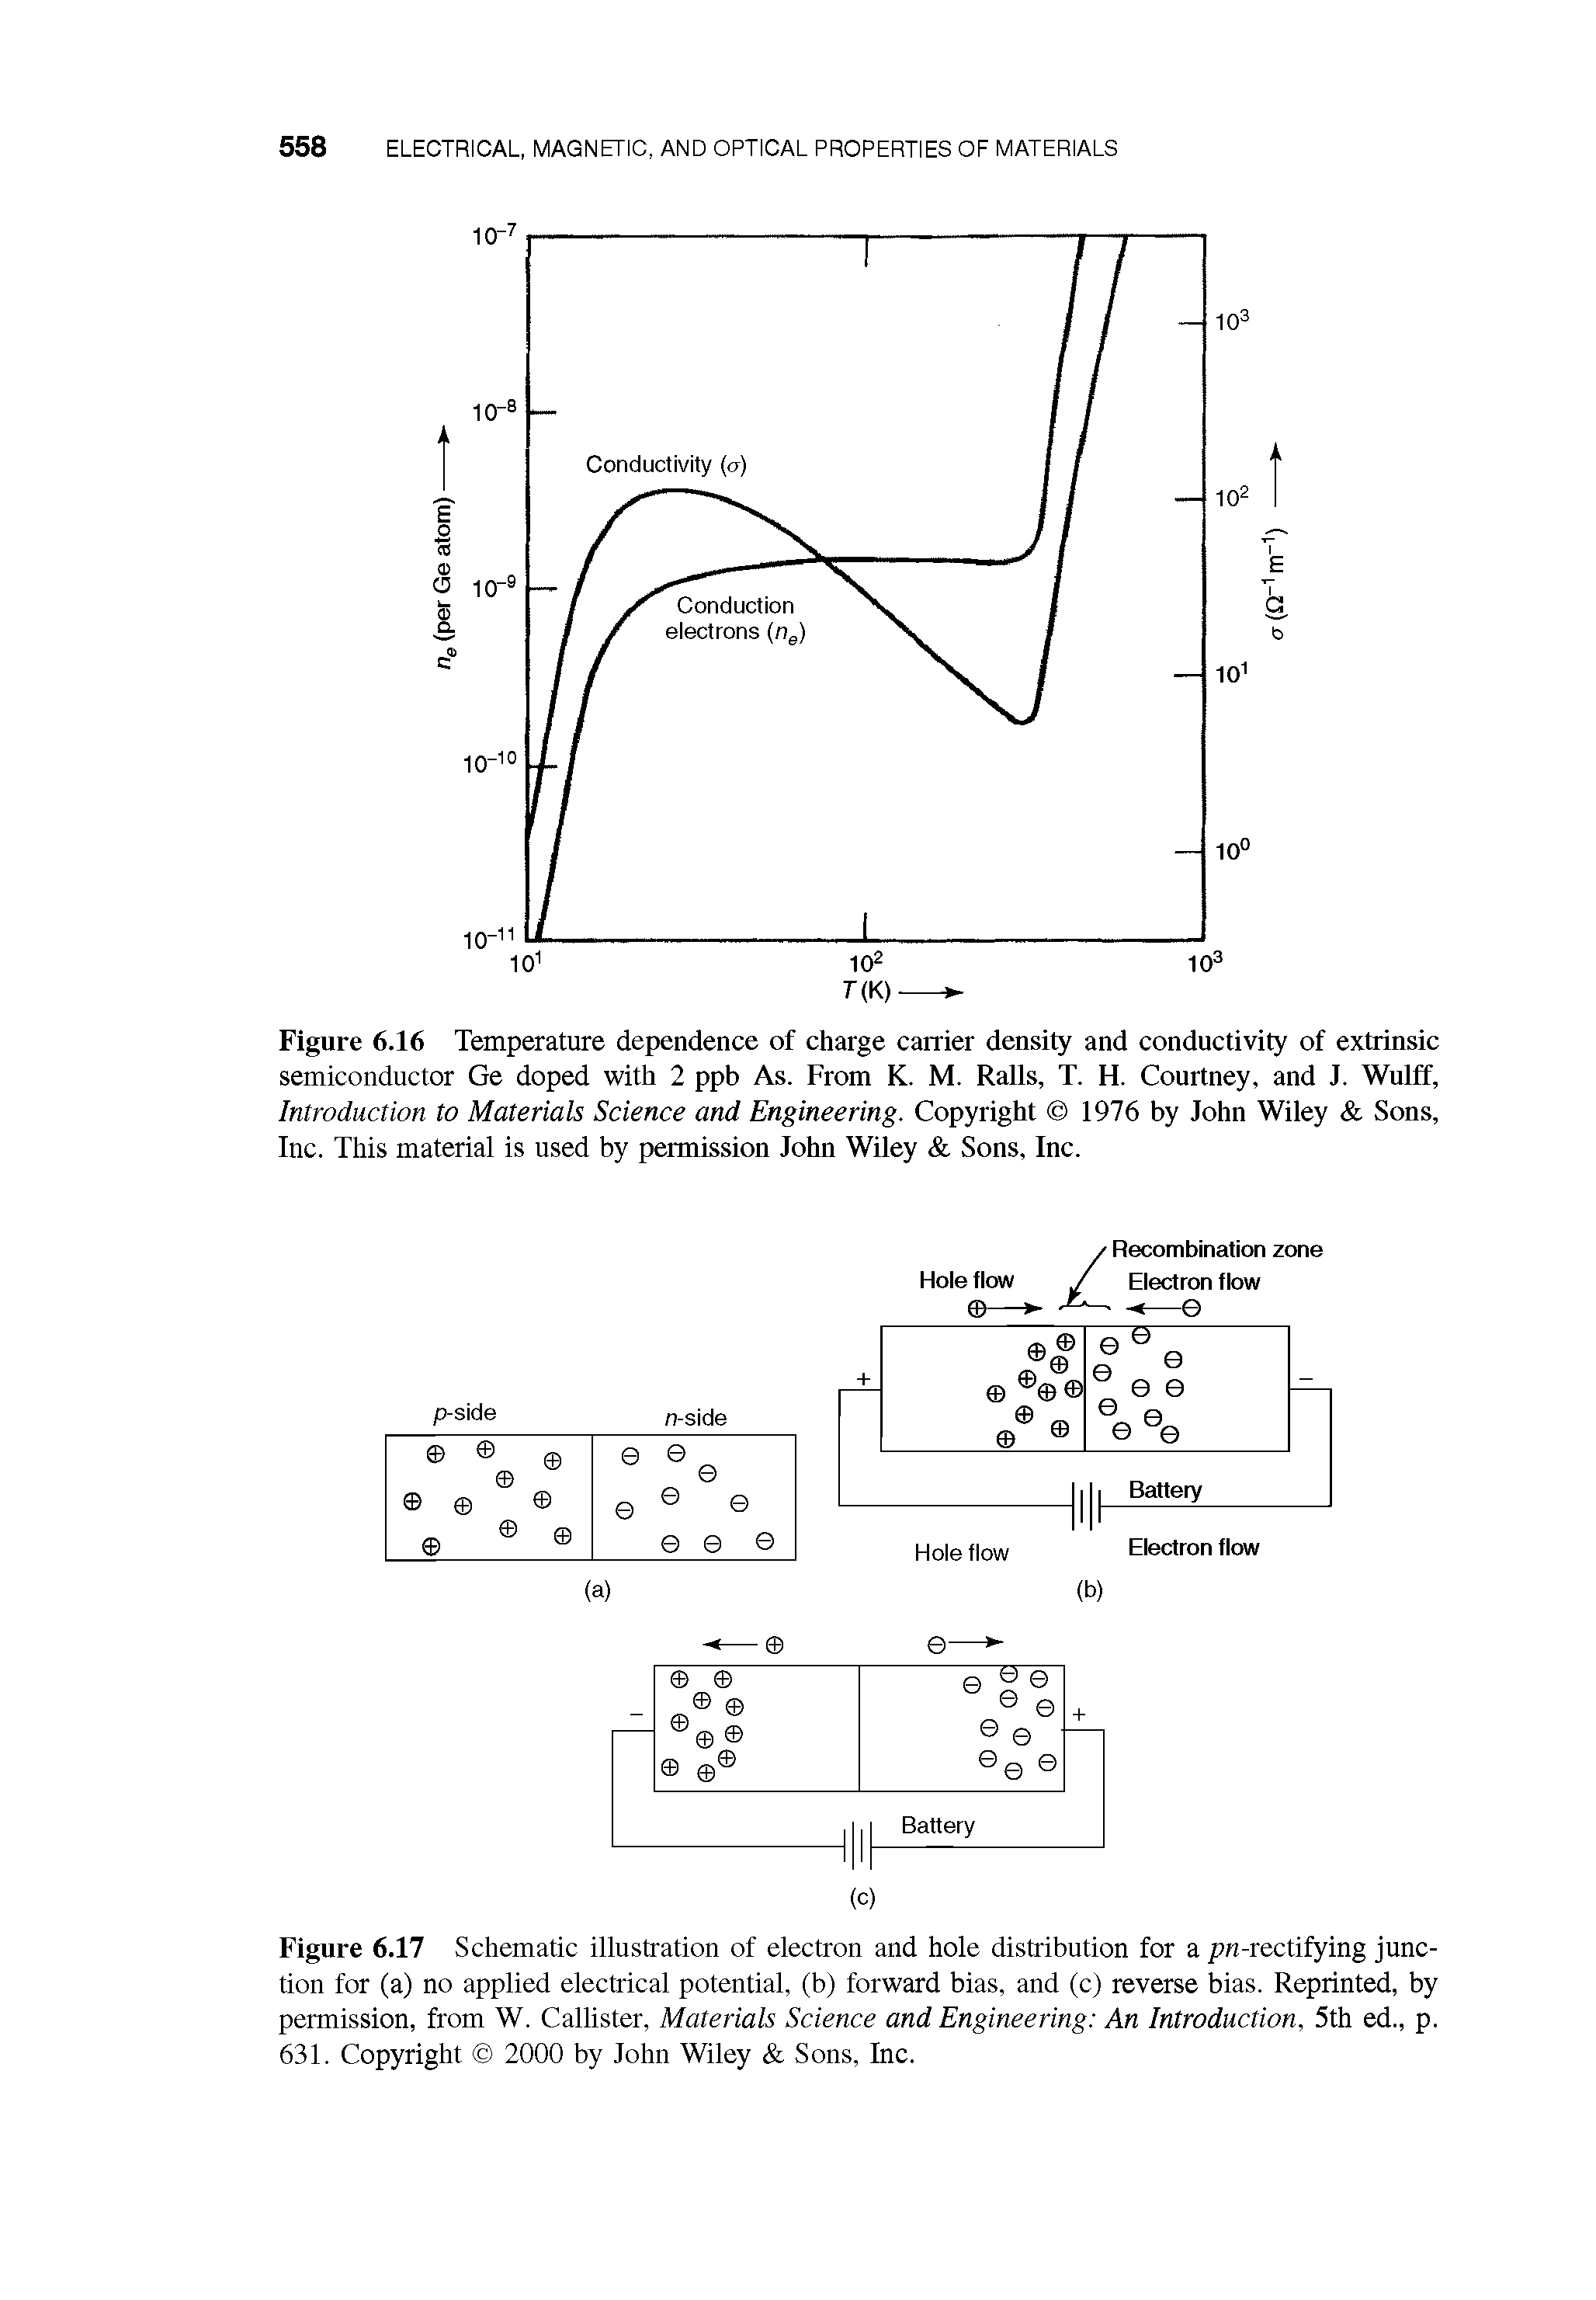 Figure 6.17 Schematic illustration of electron and hole distribution for a /rw-rectifying junction for (a) no applied electrical potential, (b) forward bias, and (c) reverse bias. Reprinted, by permission, from W. Callister, Materials Science and Engineering An Introduction, 5th ed., p. 631. Copyright 2000 by John Wiley Sons, Inc.